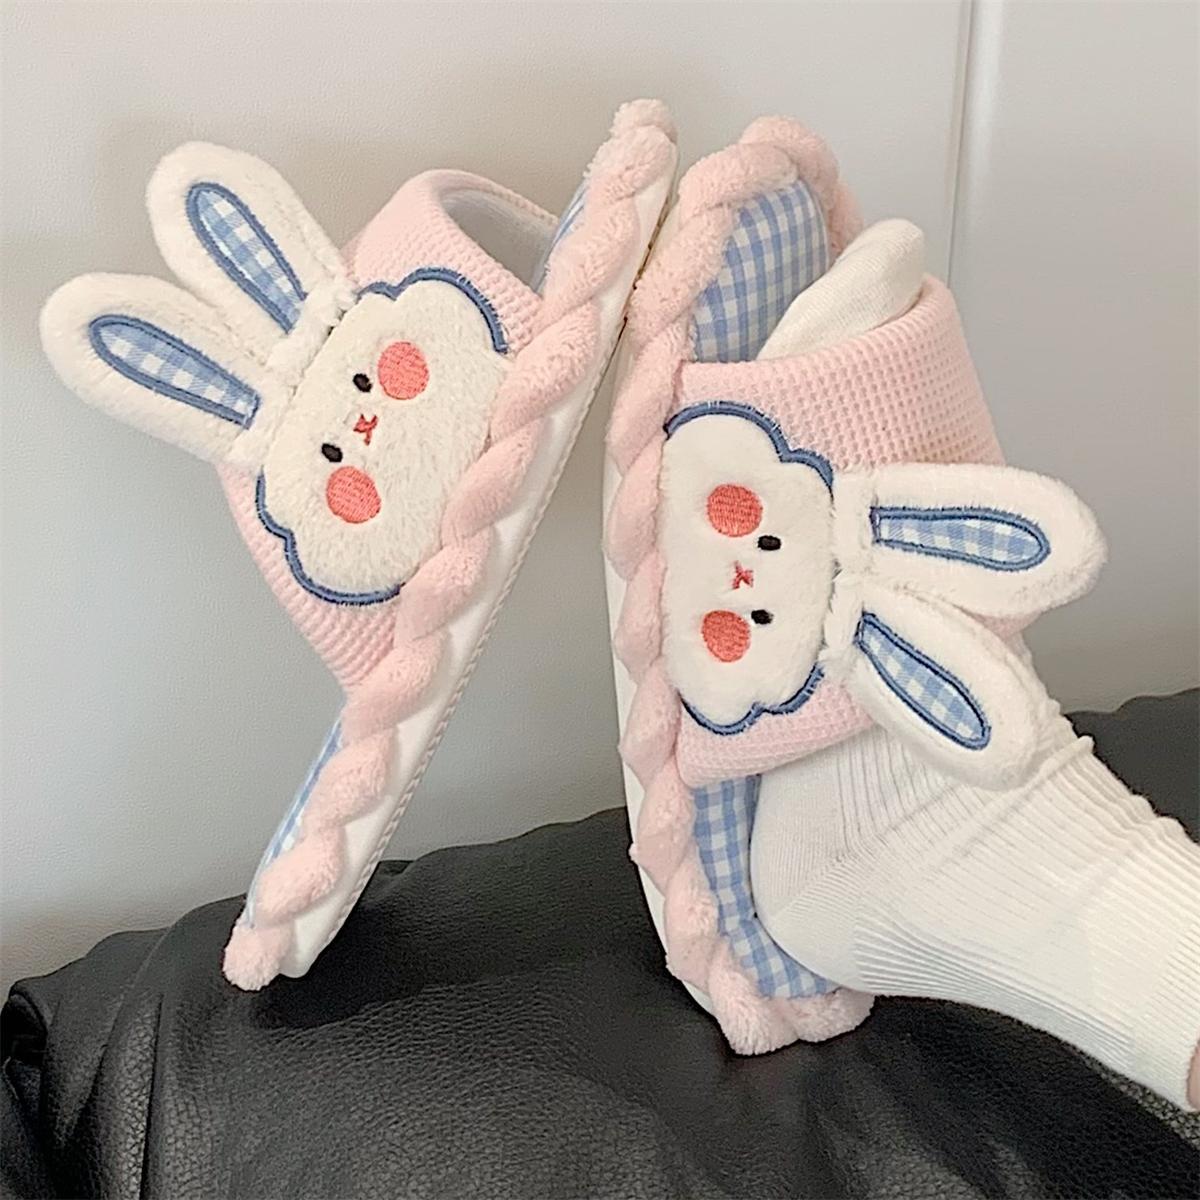 Thin strip female spring and summer girl heart home non-slip mute cute rabbit linen sandals four seasons cotton and linen slippers